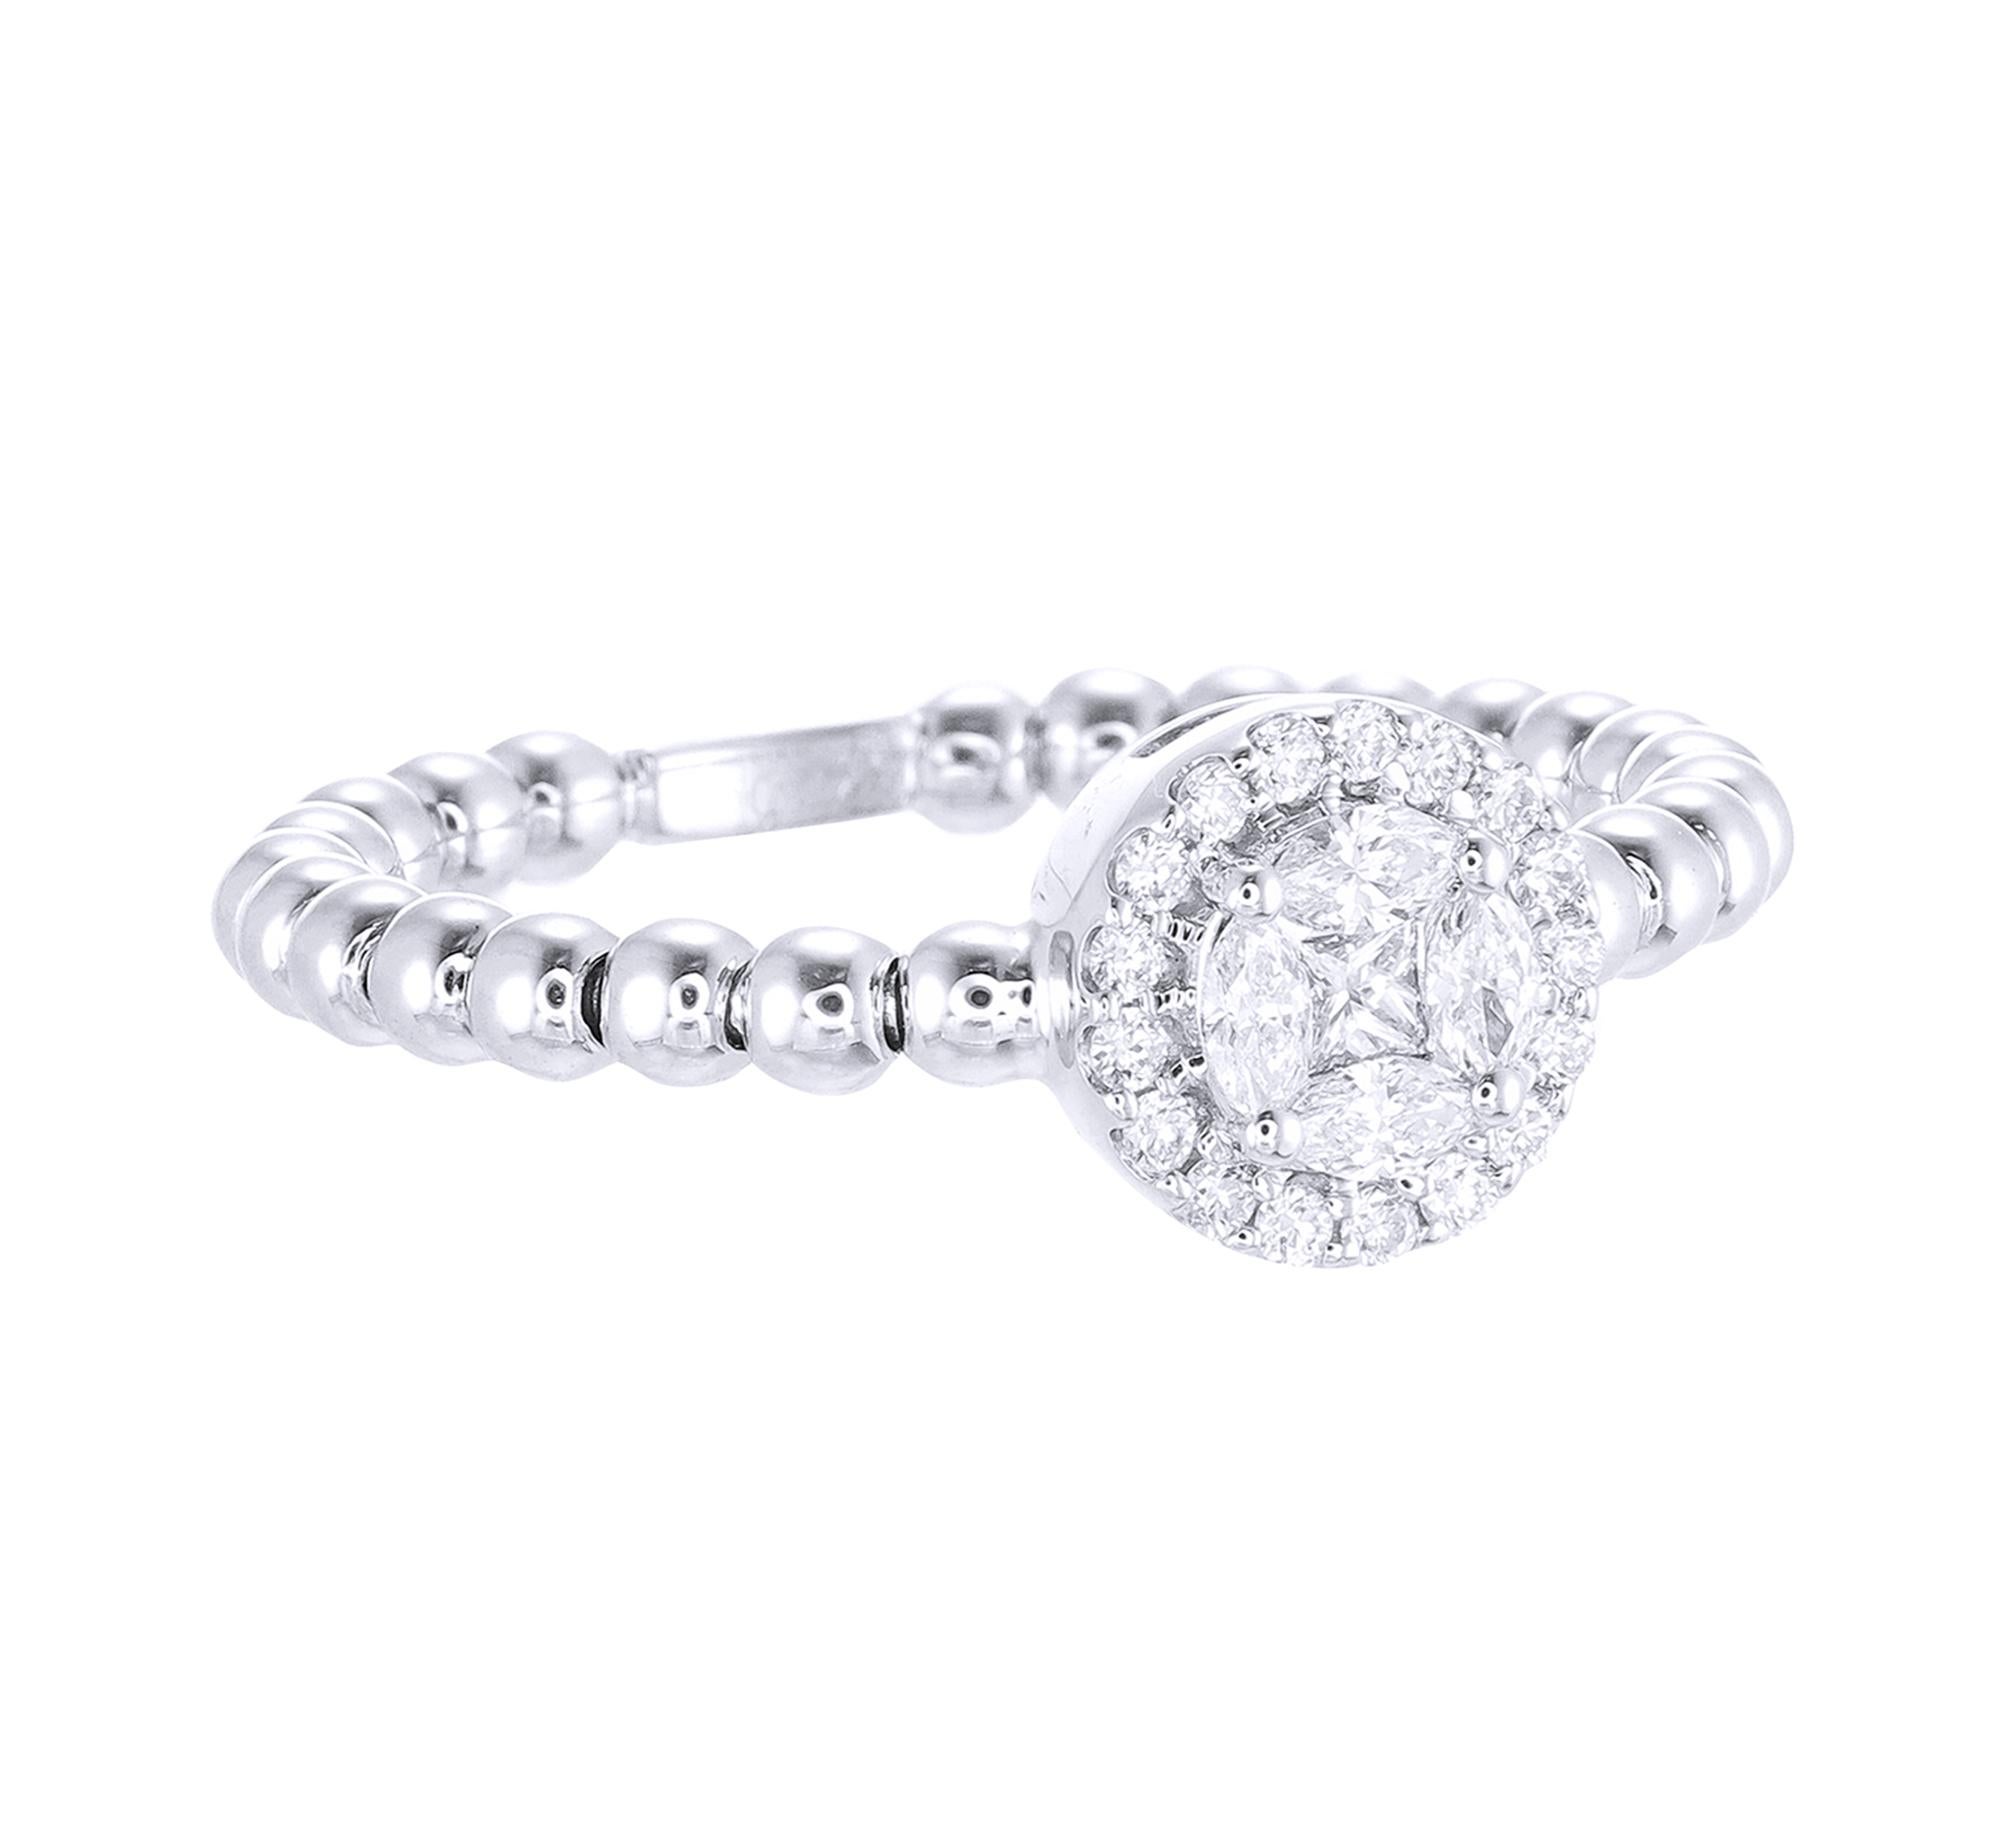 This 18K White Gold cocktail ring features a luscious Round shape White Diamond Illusion, accentuated by a halo of Round Brilliant Cut diamonds. Combine with glamorous outfits for a show-stopping effect. Each diamond hand-selected by our experts for